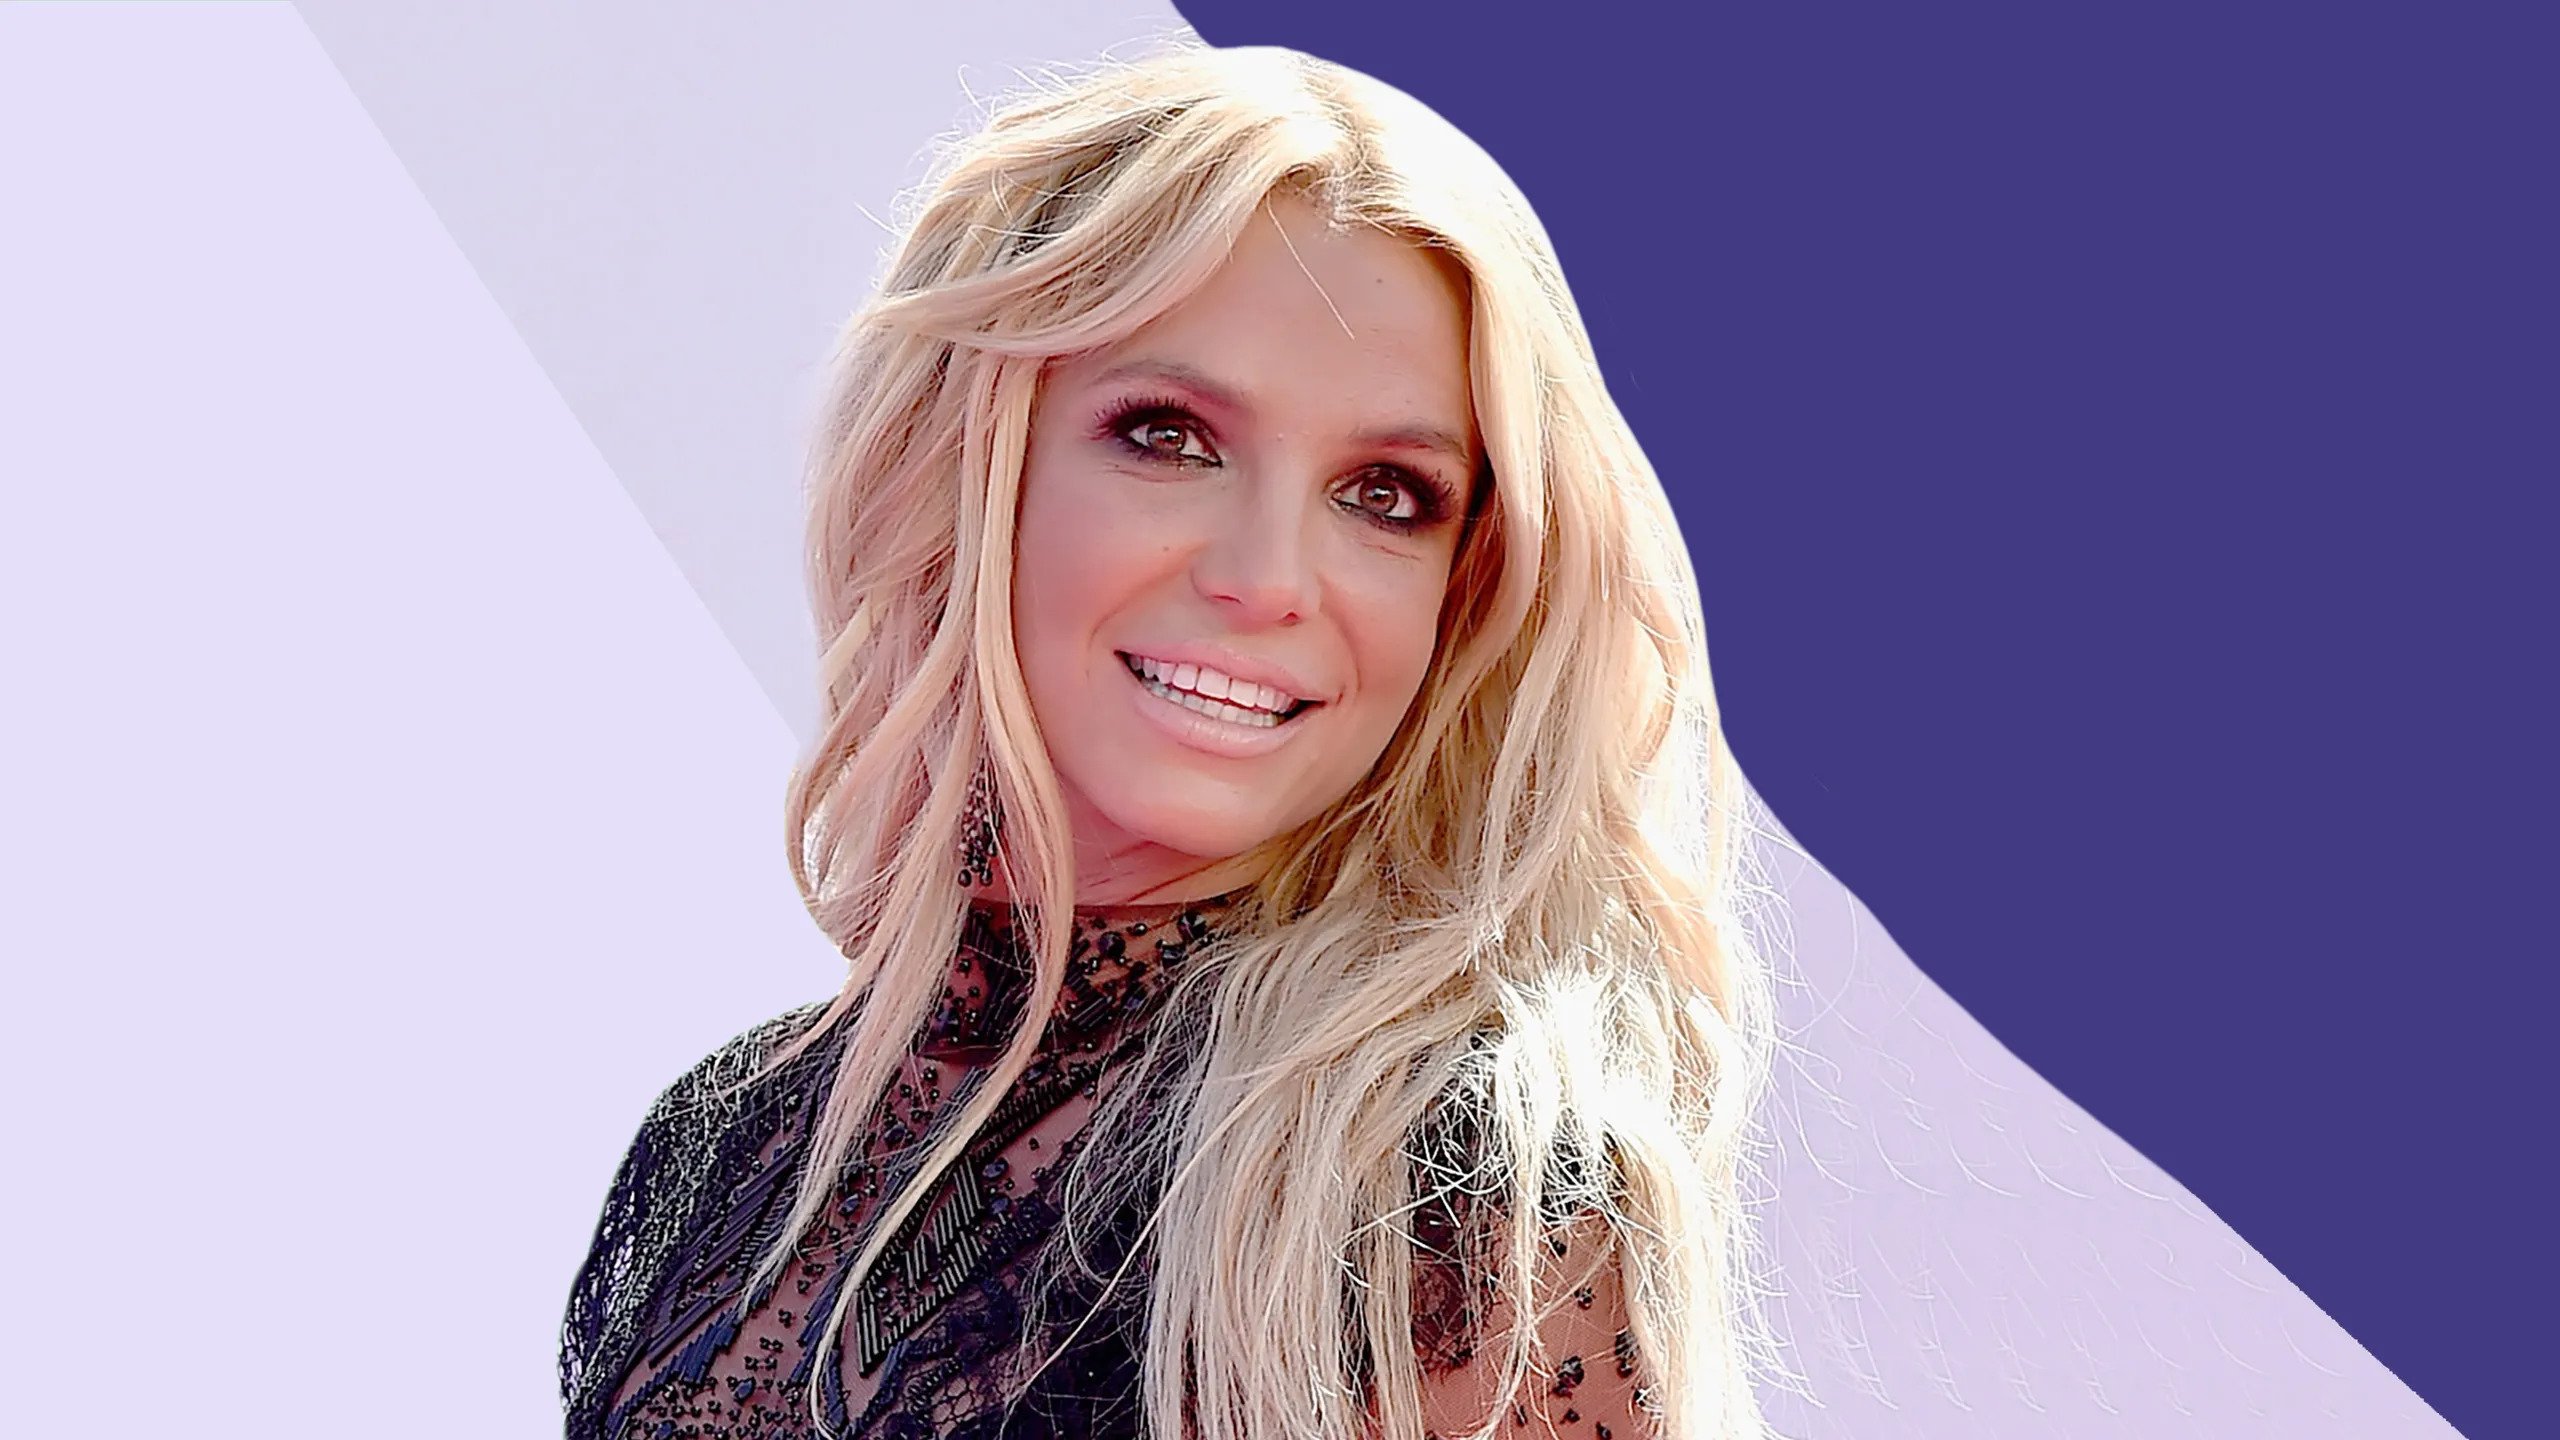 45 Facts about Britney Spears - Facts.net